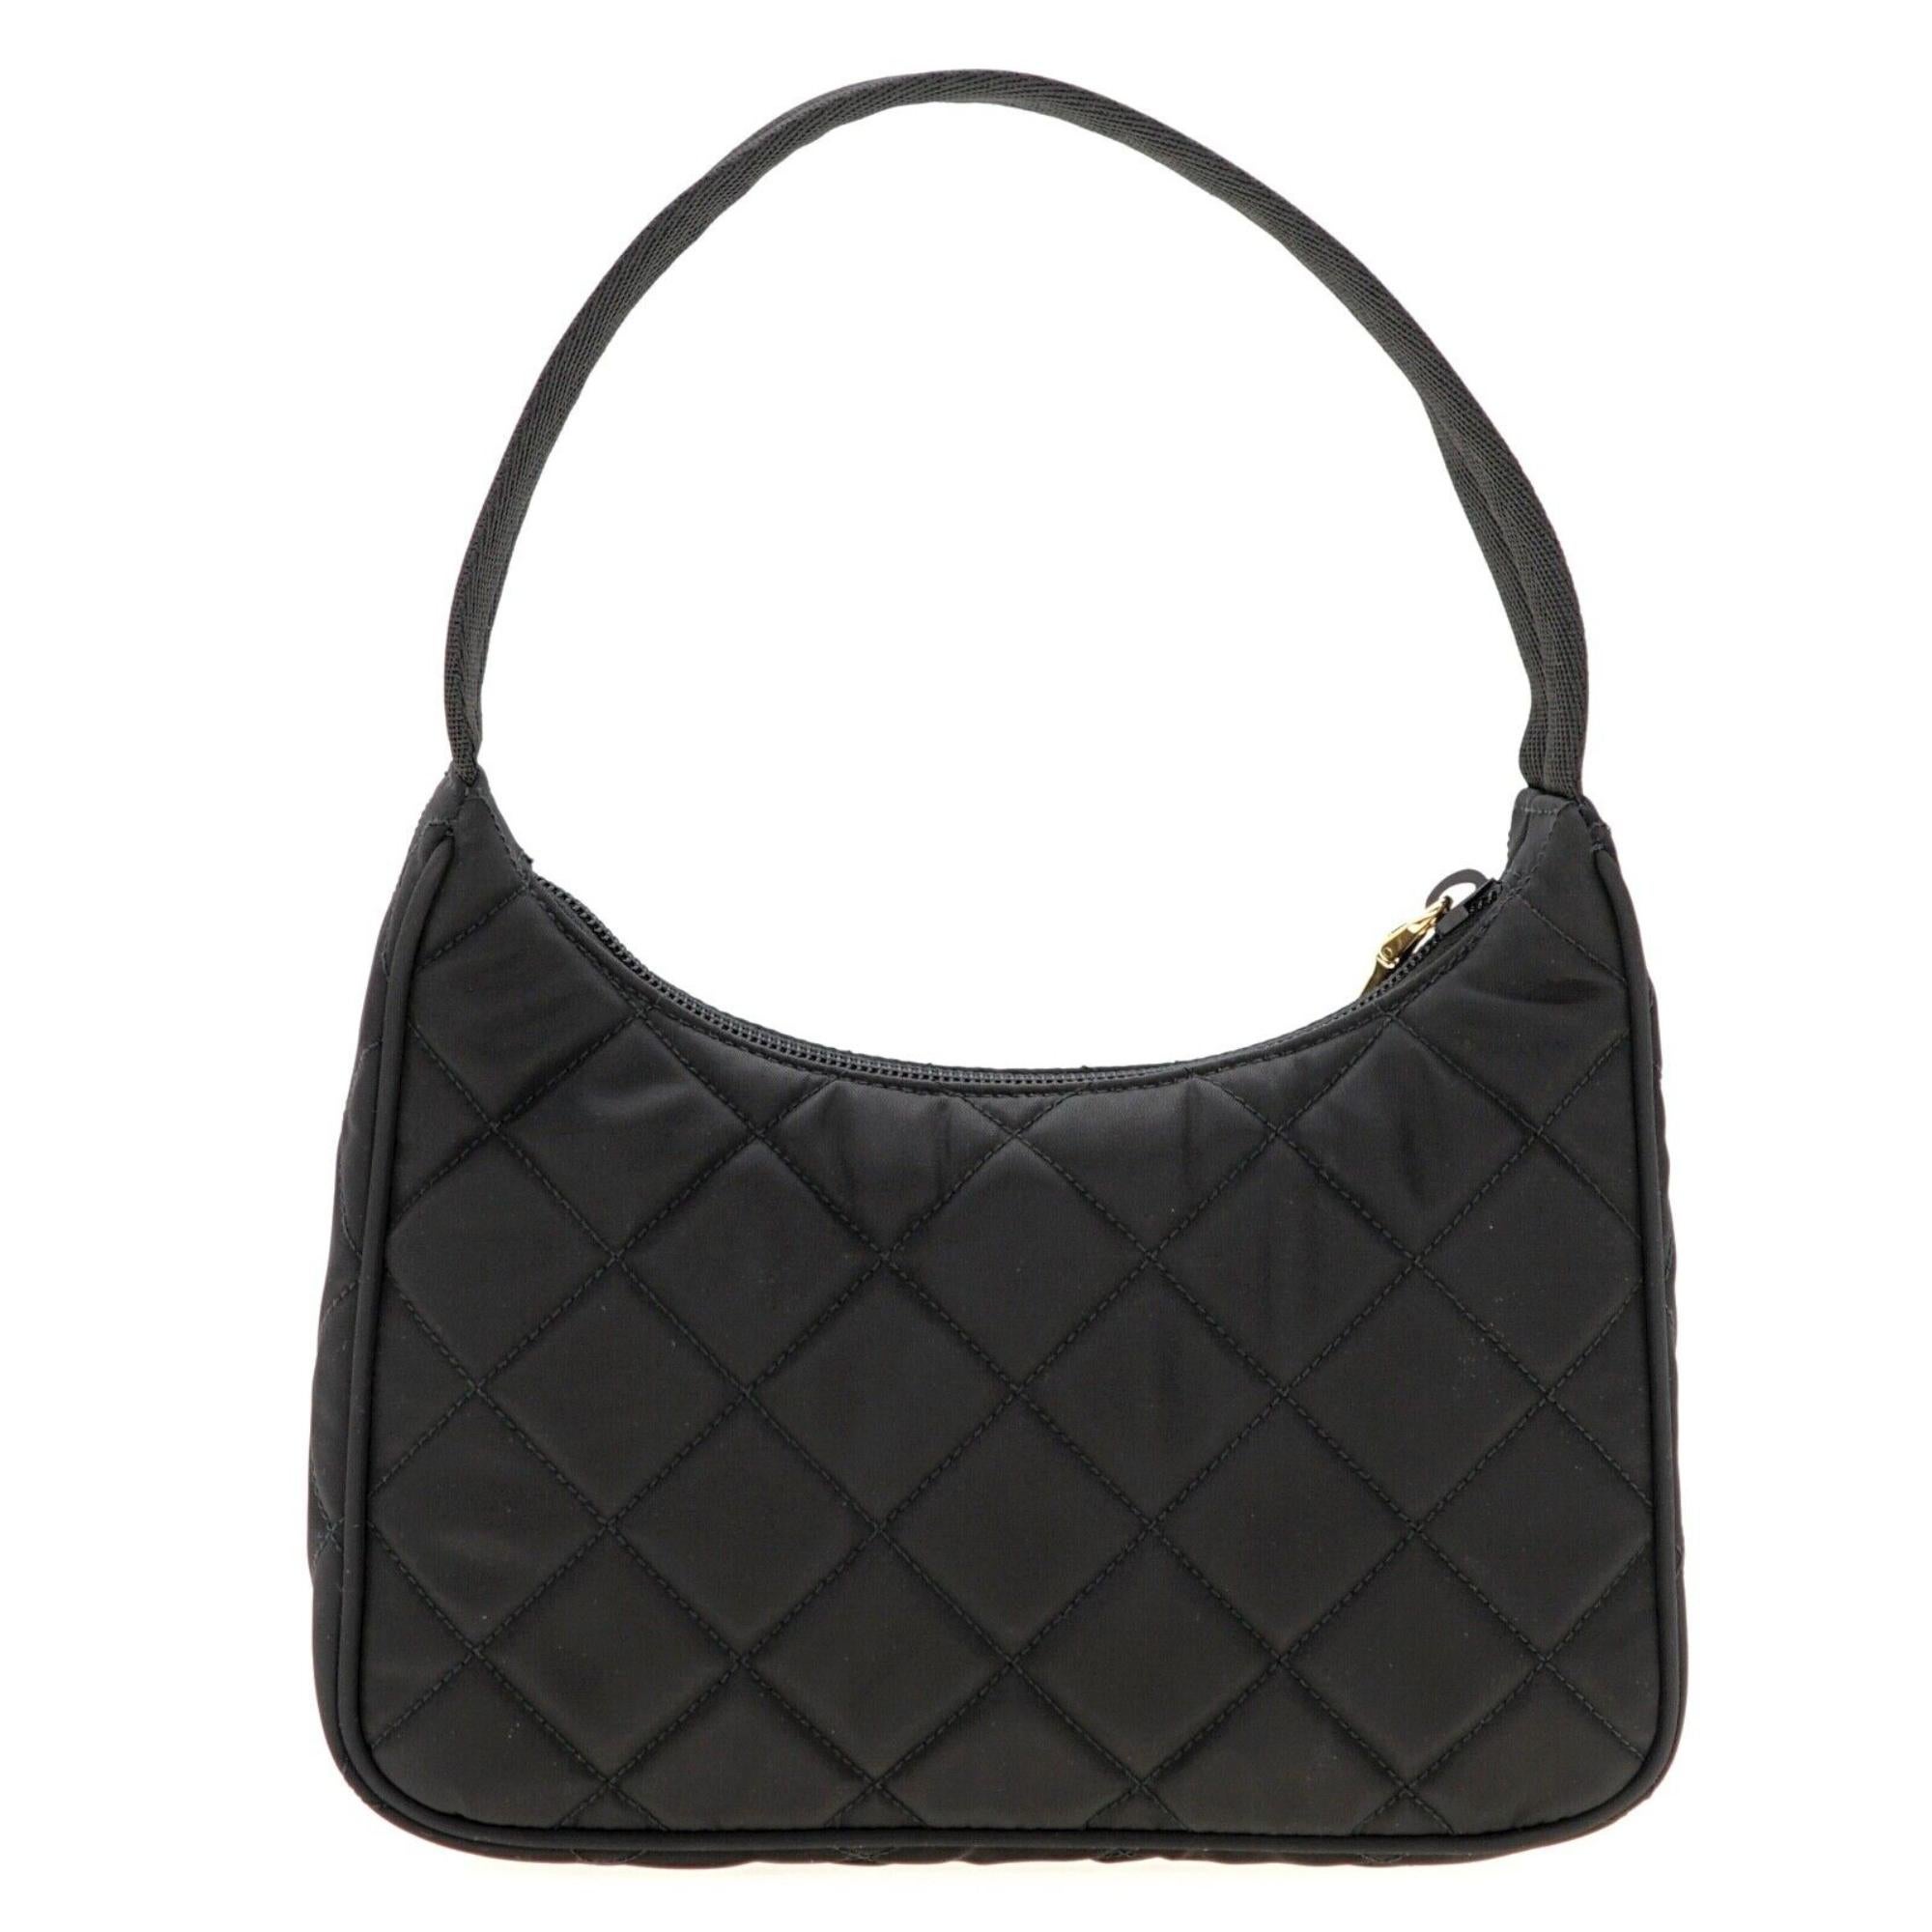 Prada Re-editon Mini Quilted Black Nylon Shoulder Bag Gold Hardware In Excellent Condition For Sale In Montreal, Quebec